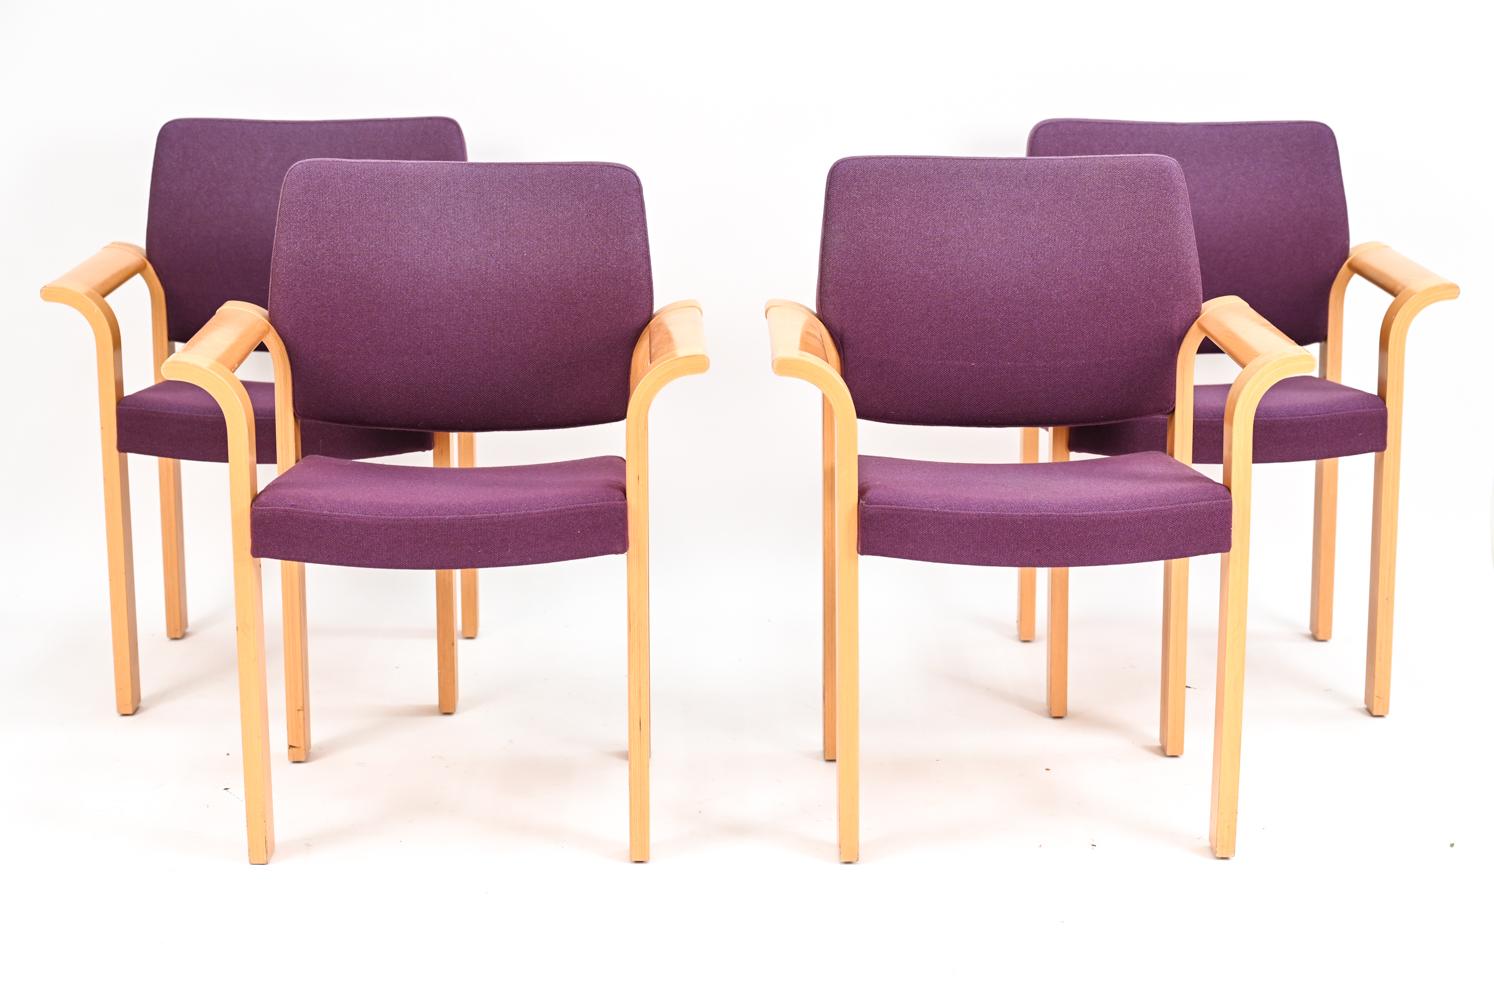 Four Danish mid-century armchairs designed by Rud Thygesen & Johnny Sørensen for Magnus Olesen, c. 1970's. Boasting beechwood frames with flared armrests and purple wool fabric, these fabulous model 